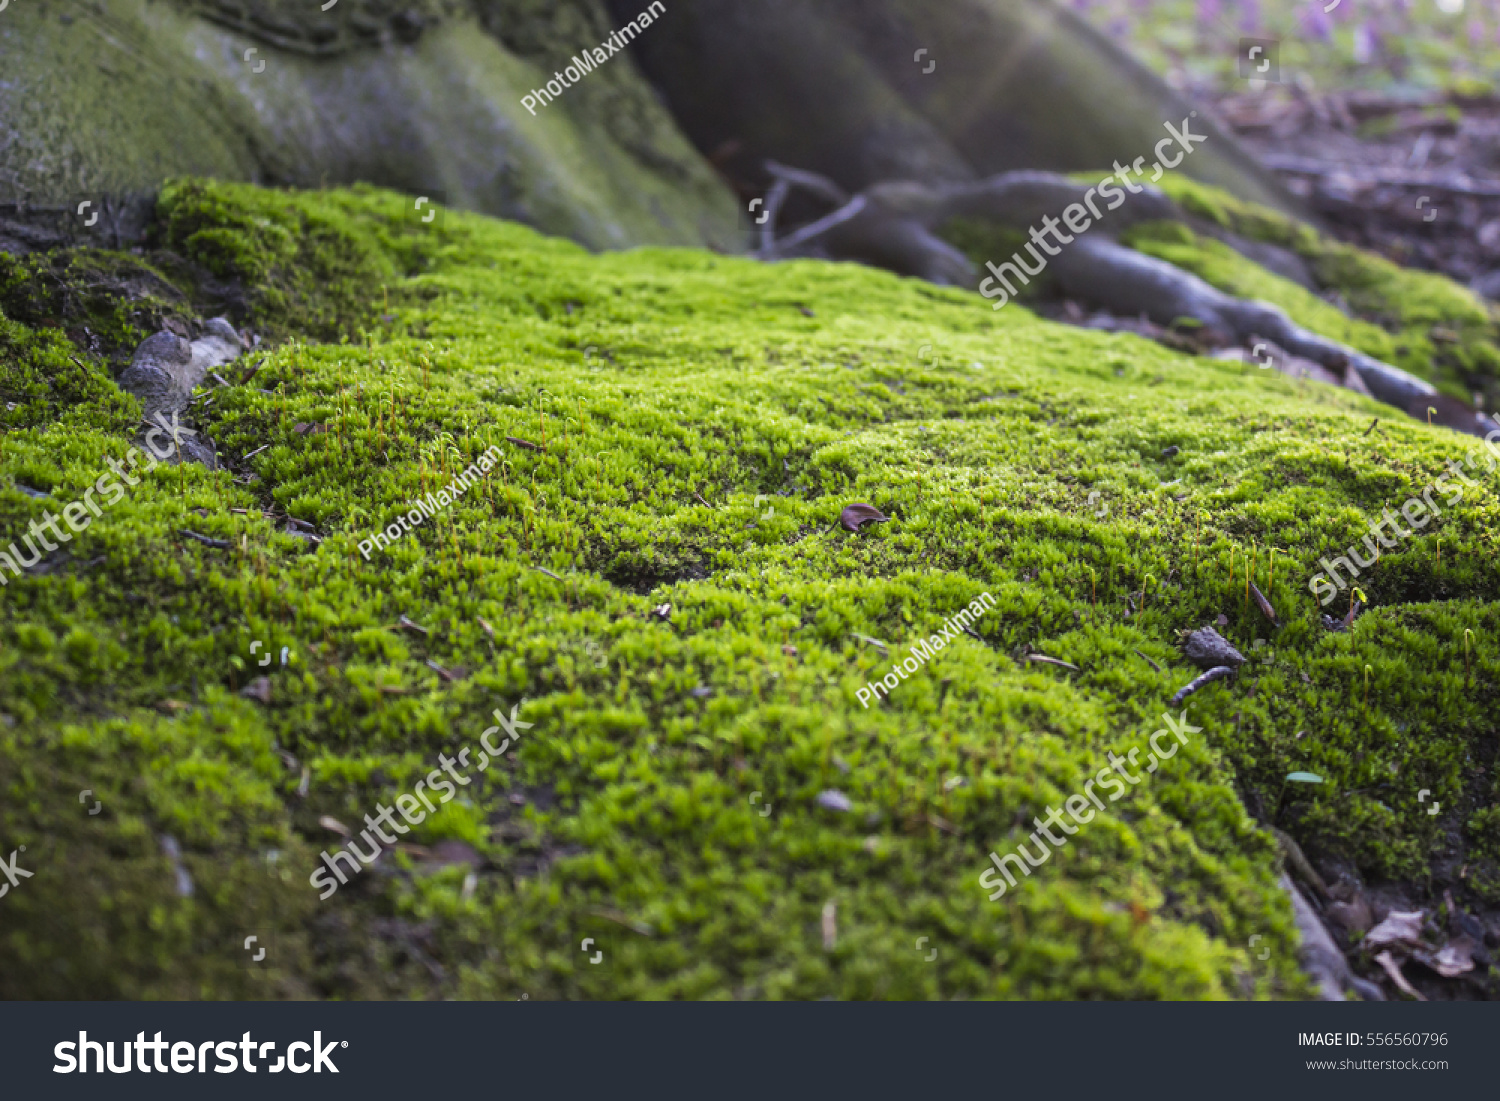 Close up of Moss on tree. Nature life background #556560796